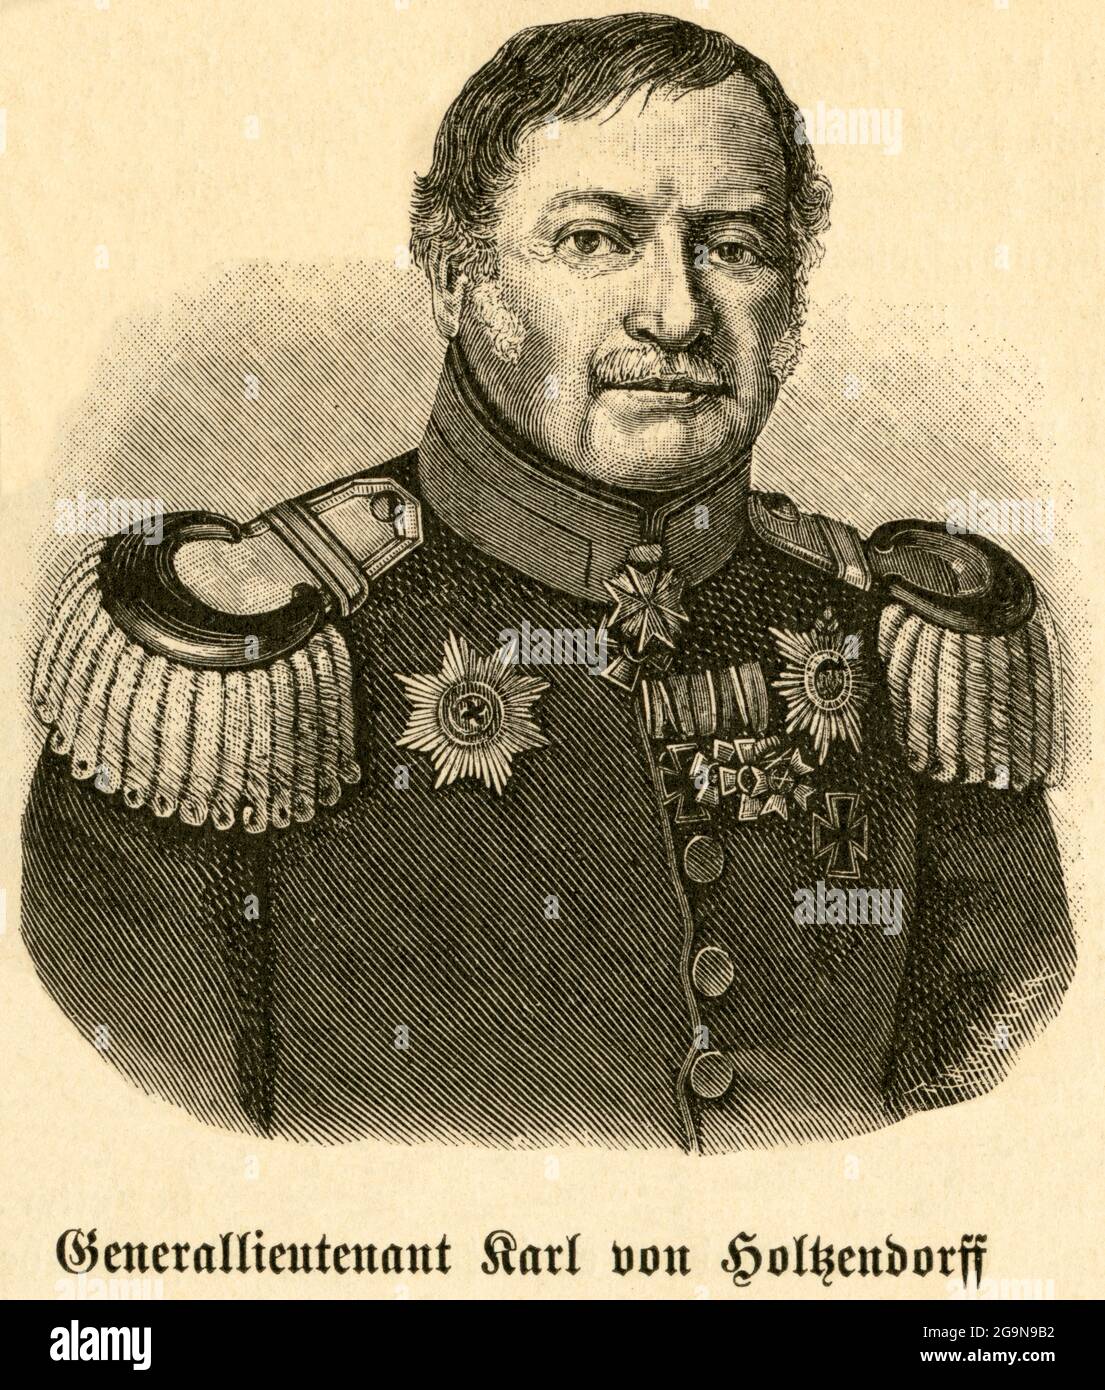 Europe, Germany, Berlin, Karl von Holtzendorff, Prussian lieutenant general, ARTIST'S COPYRIGHT HAS NOT TO BE CLEARED Stock Photo